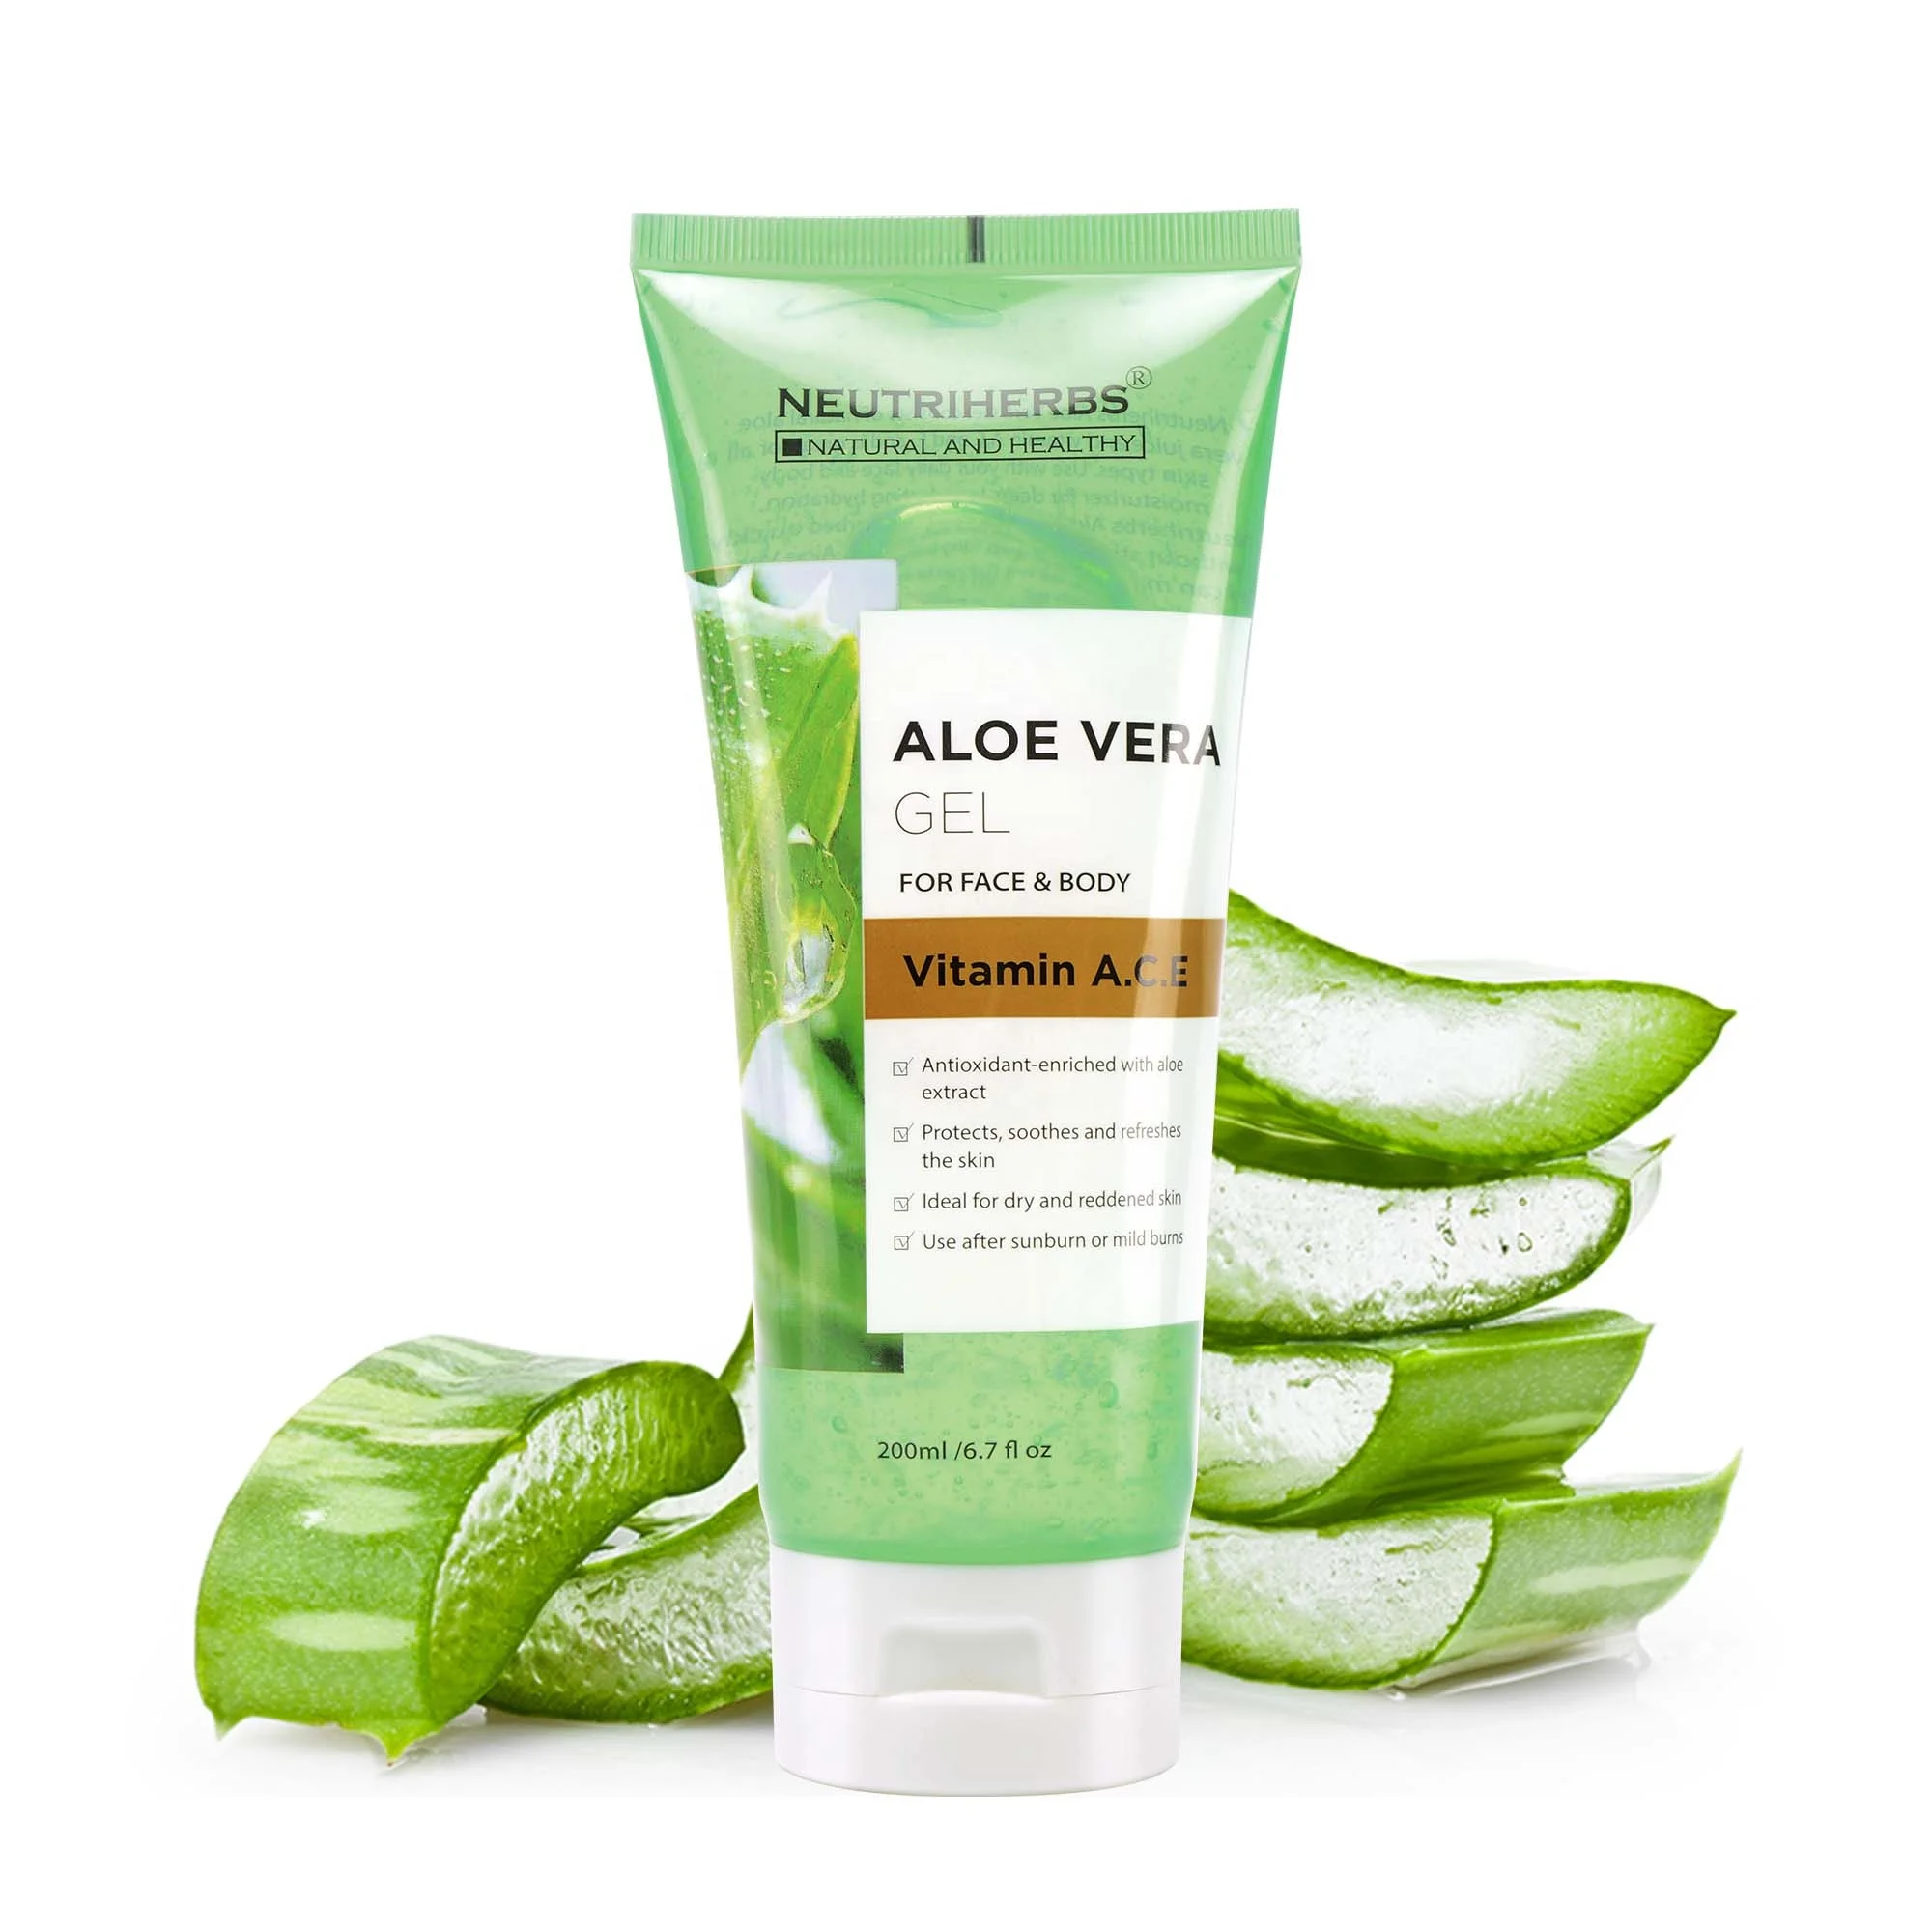 Natural Oem Remove Acne Scars Creme Organic 99% Aloe Vera Soothing Gel For Skin - Aloe Vera Soothing Gel,Aloe Vera Gel Bulk,Aloe Vera Extract Product on Alibaba.com